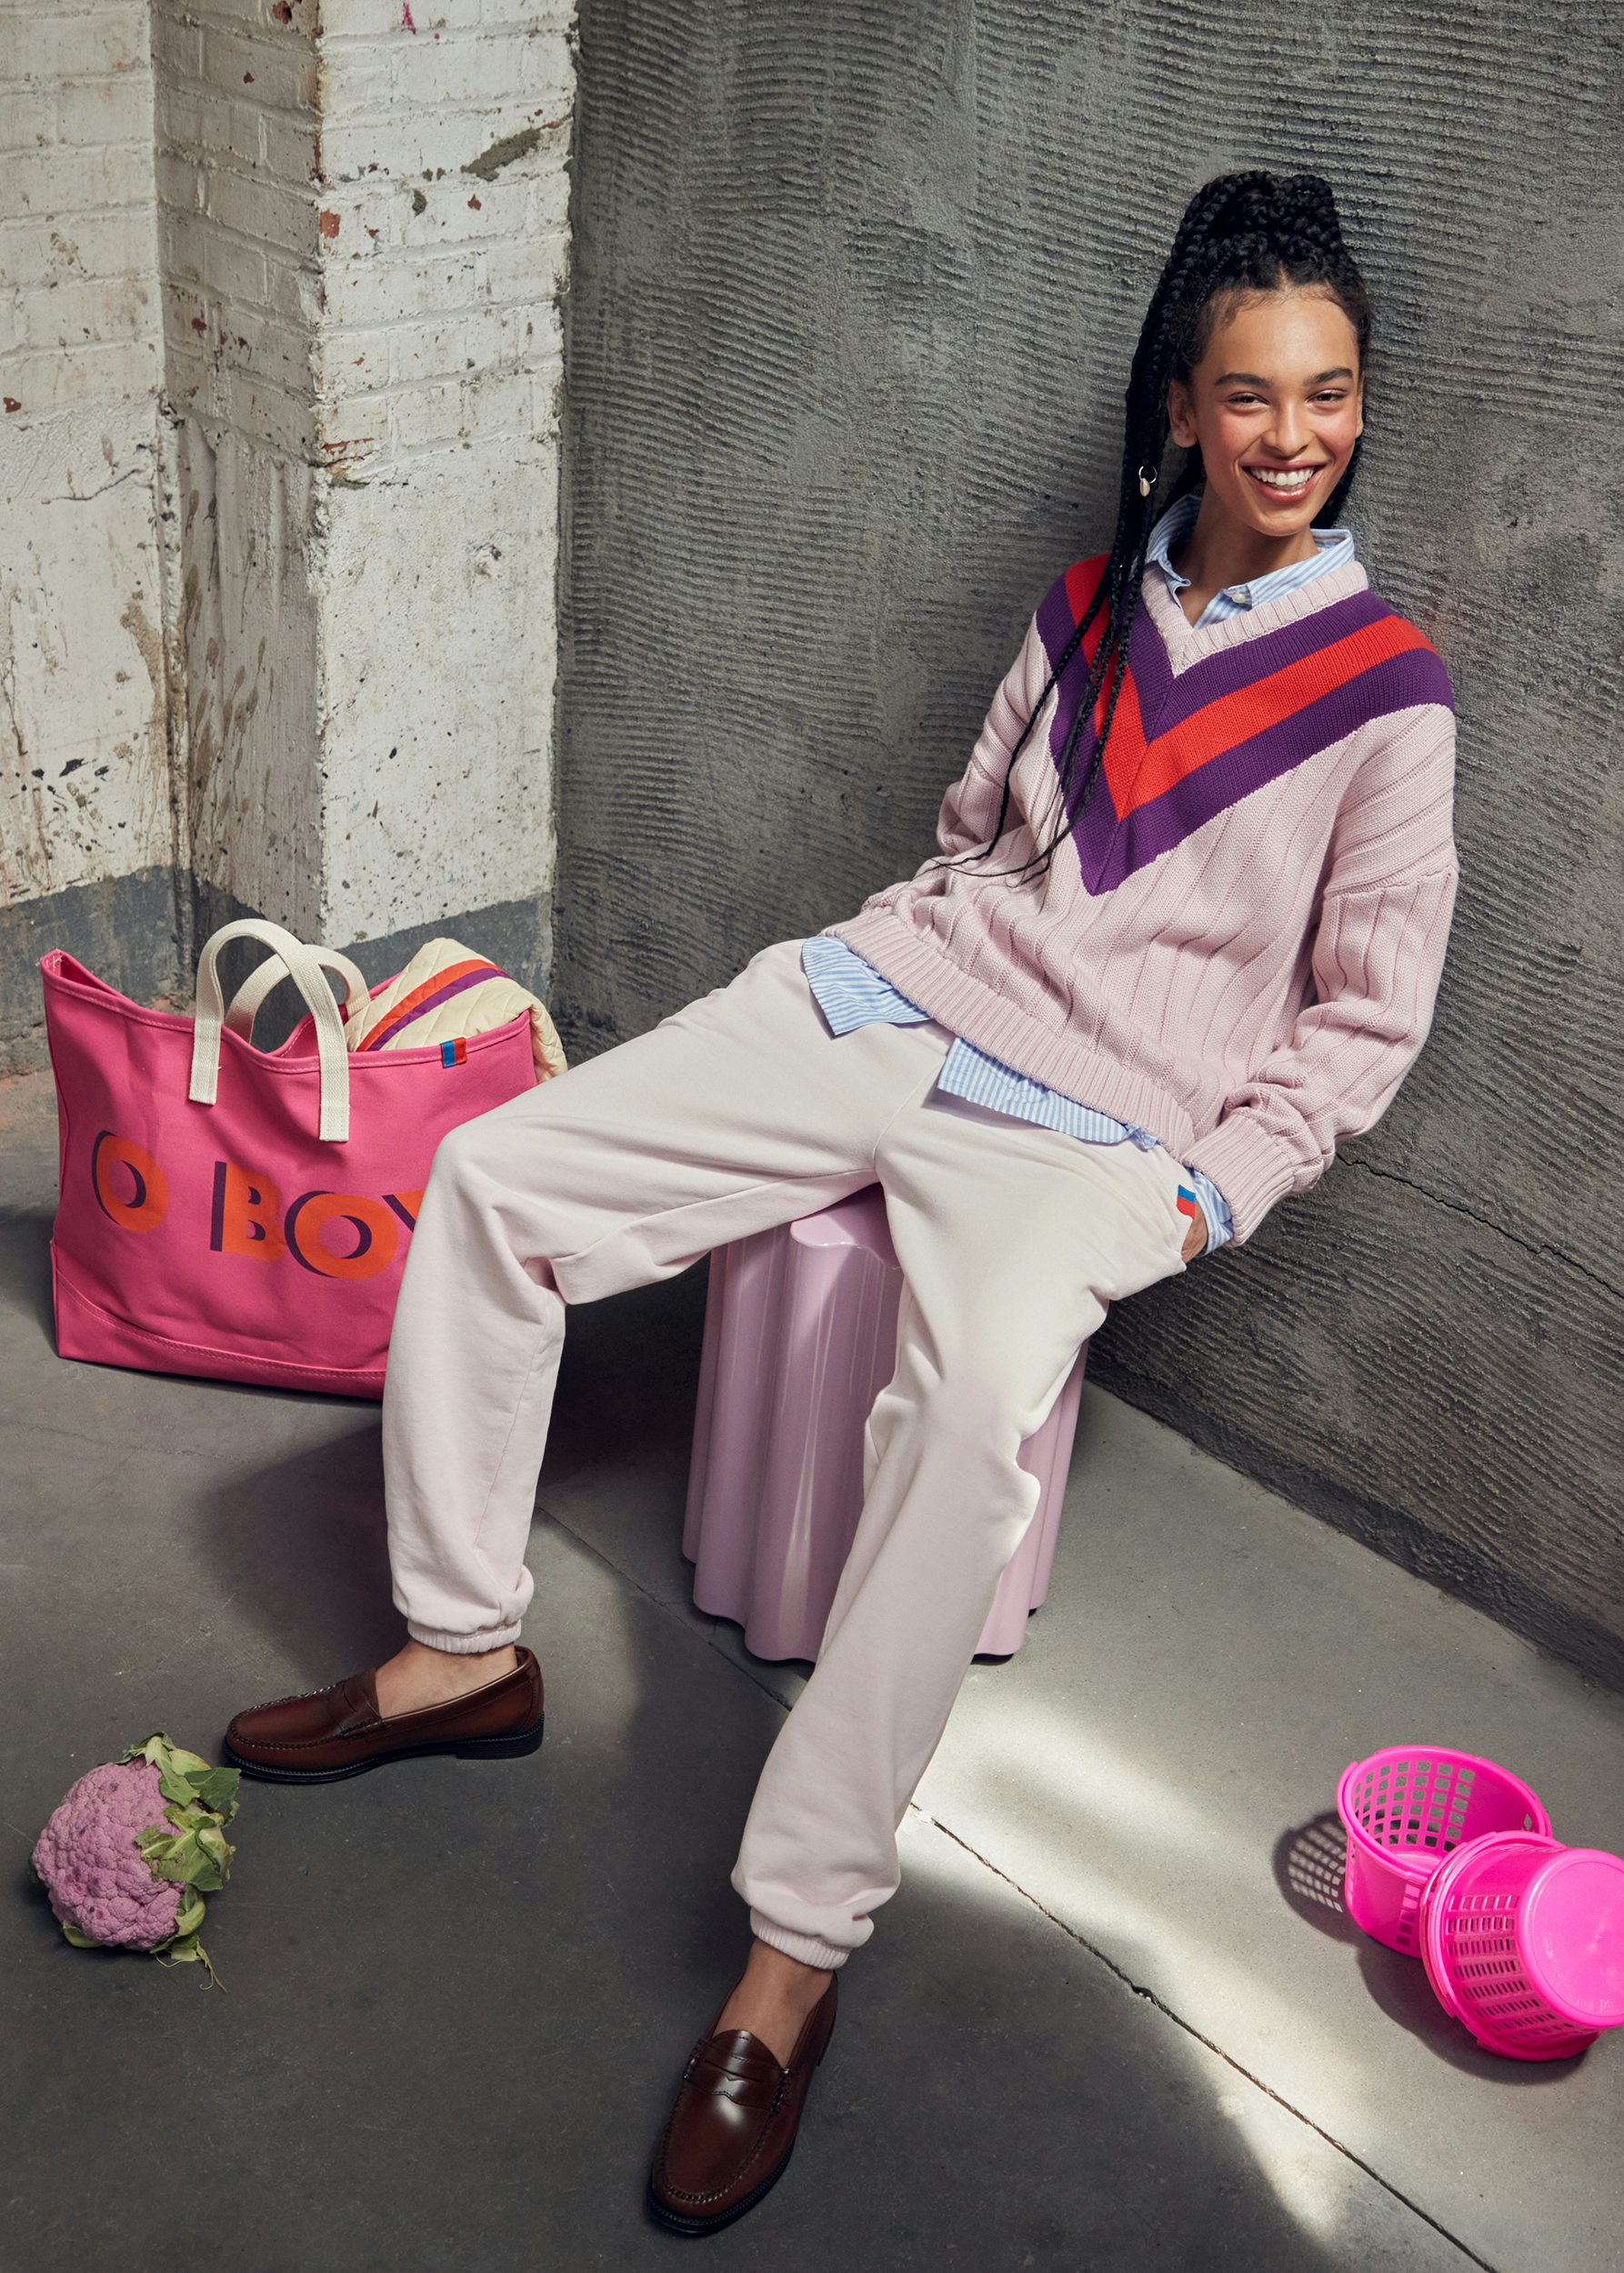 Model wearing the new light link and plum fall collection. She is wearing the new Yale v-neck sweater in light pink with a plum and poppy stripe collar. She paired it with the new light pink sweatpants. She also has the new O BOY pink/poppy tote.